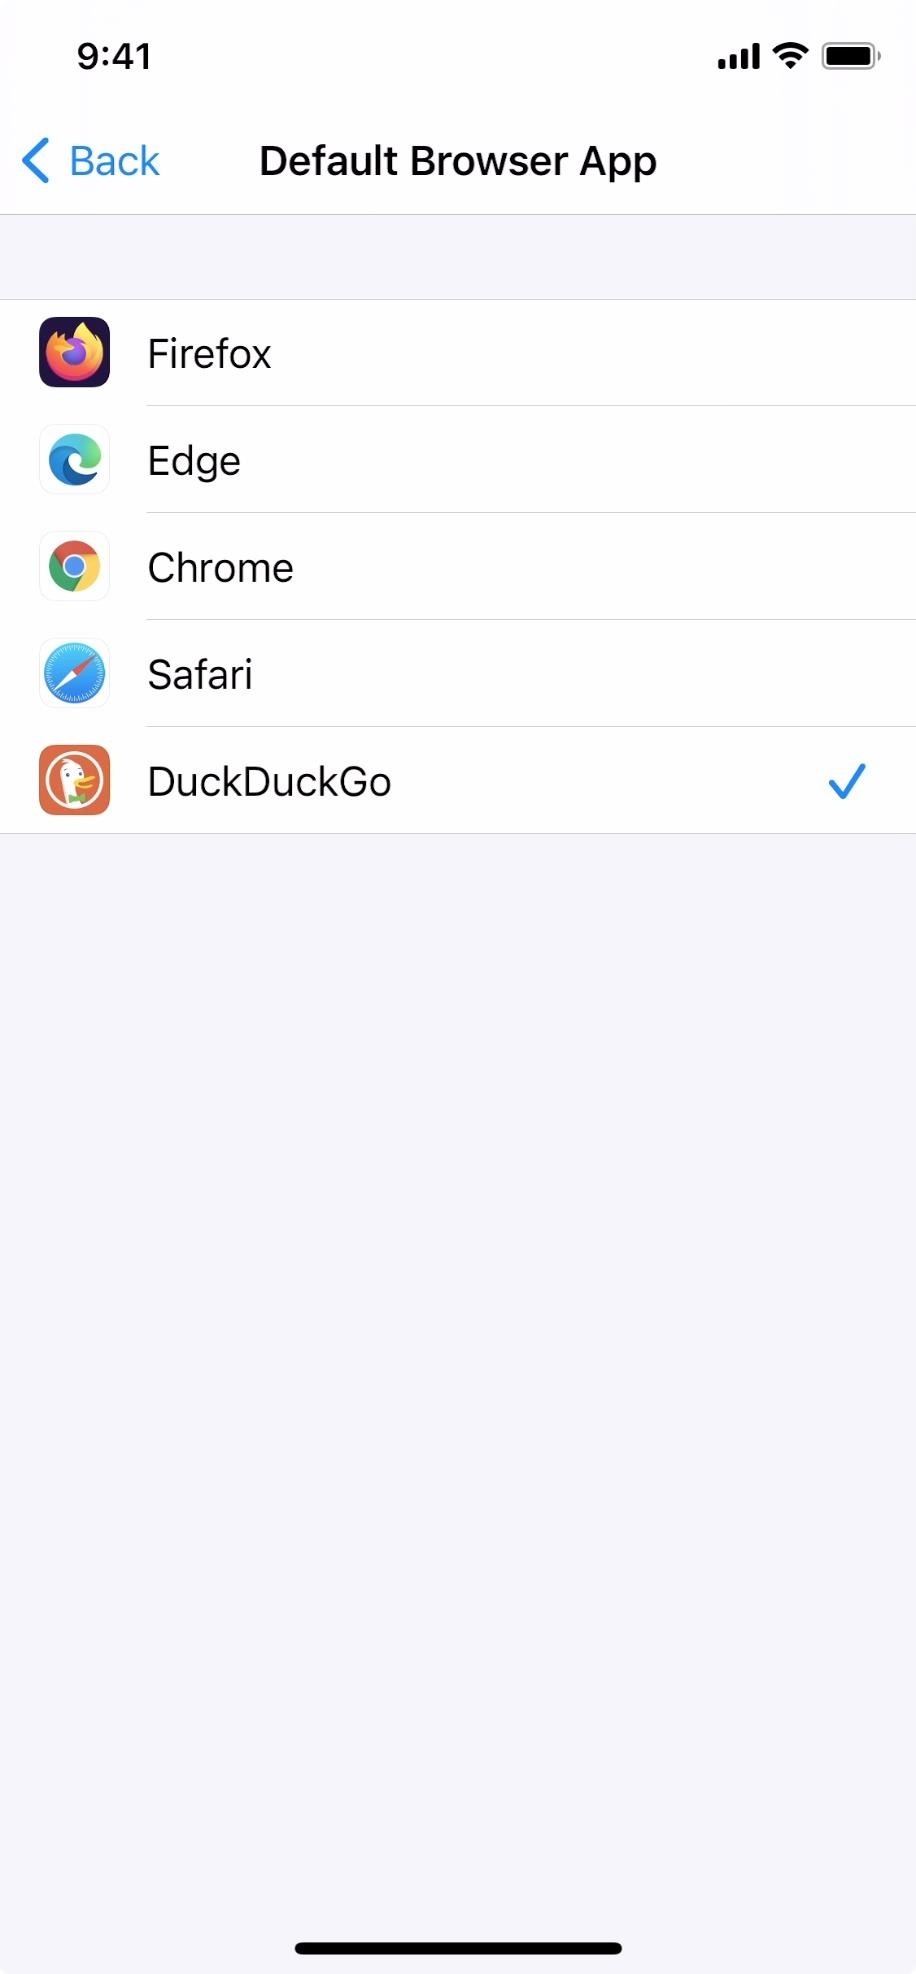 How to Change Your Default Browser in iOS 14 from Safari to Chrome, Firefox, Edge, or Another App